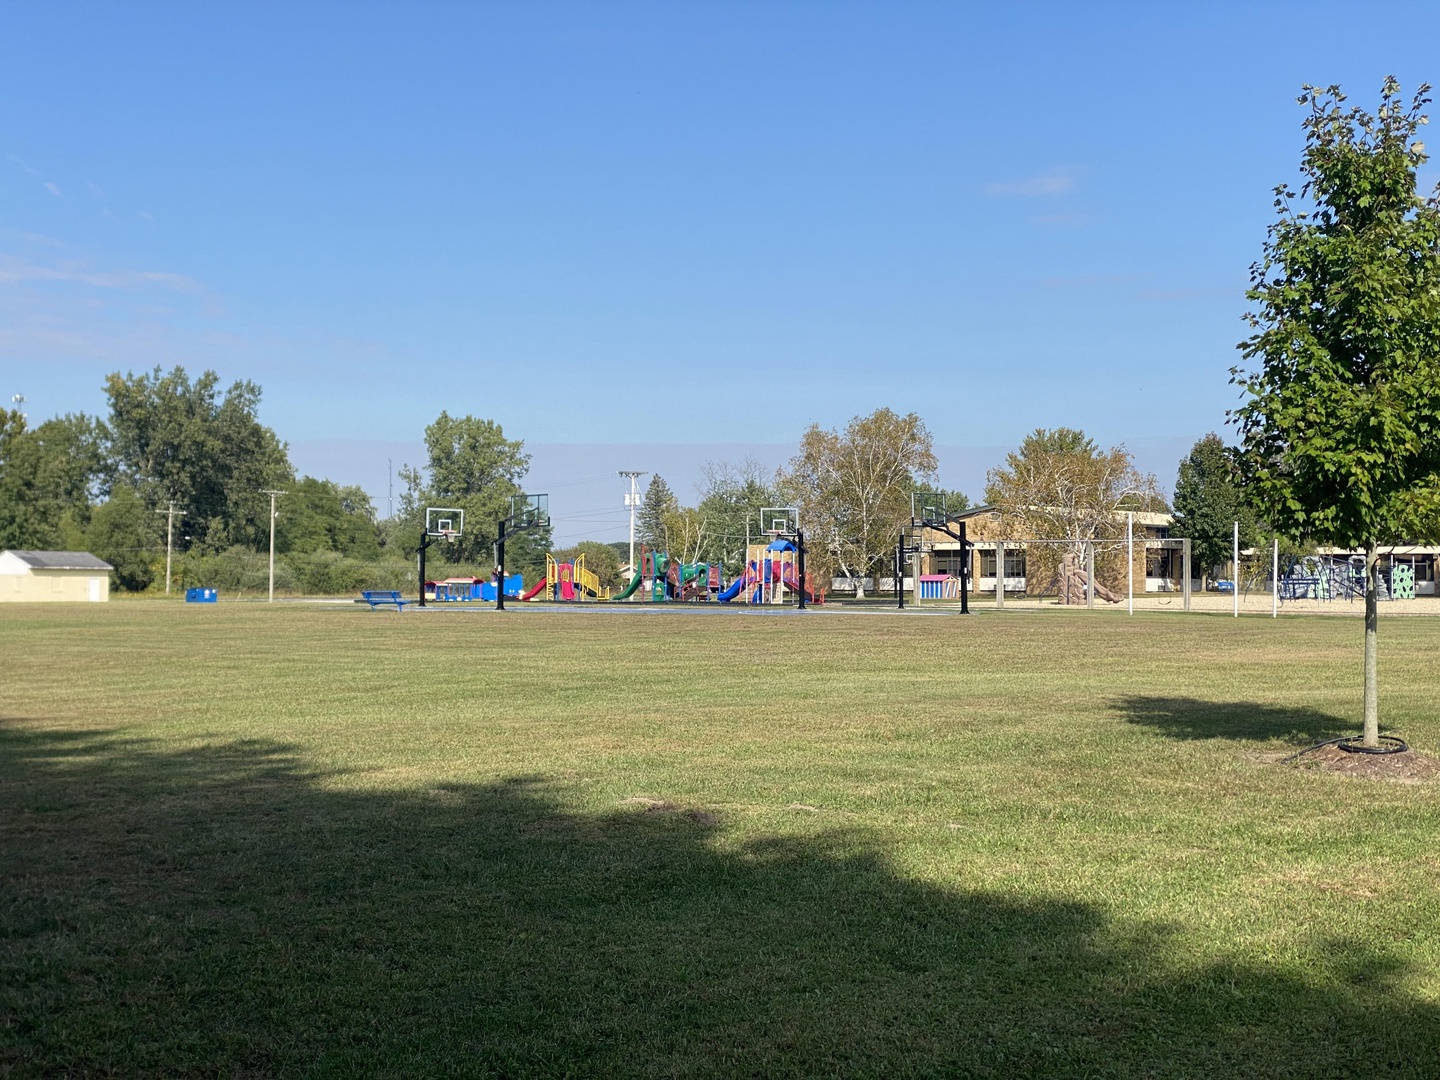 Families will love the school playground just a 1-minute walk from the homeway.